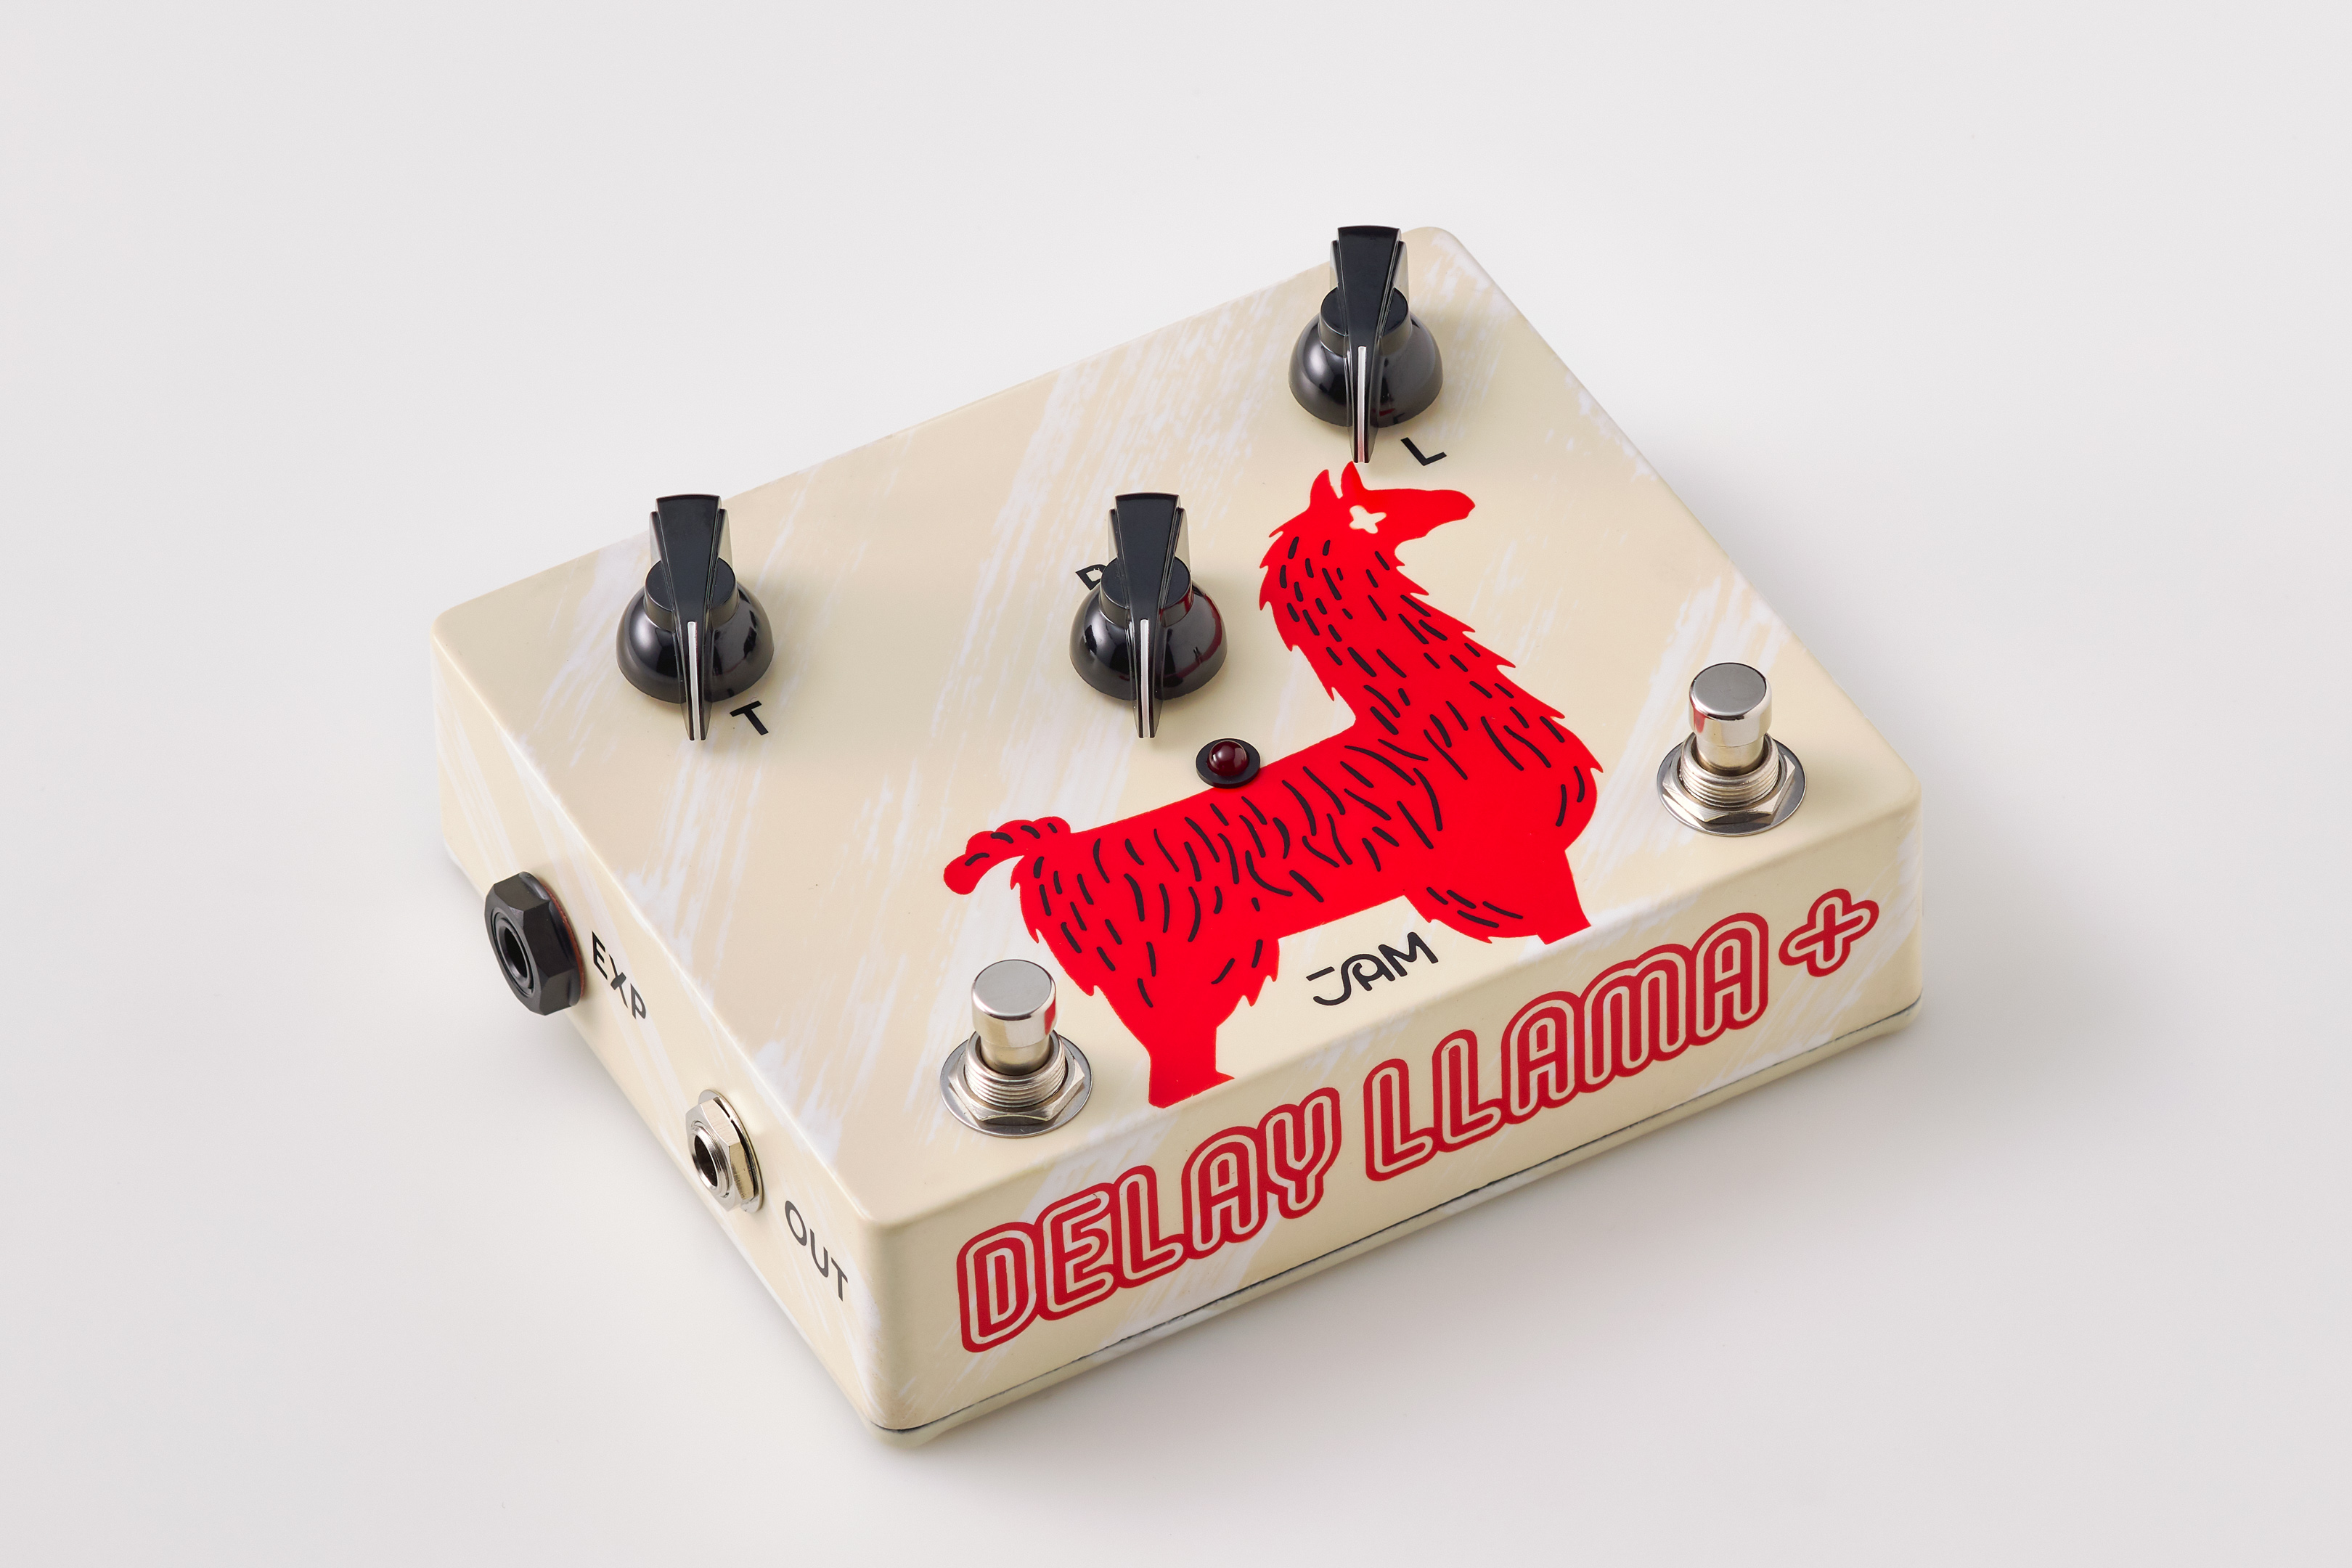 JAM pedals Delay Llama+ | analog delay with hold function